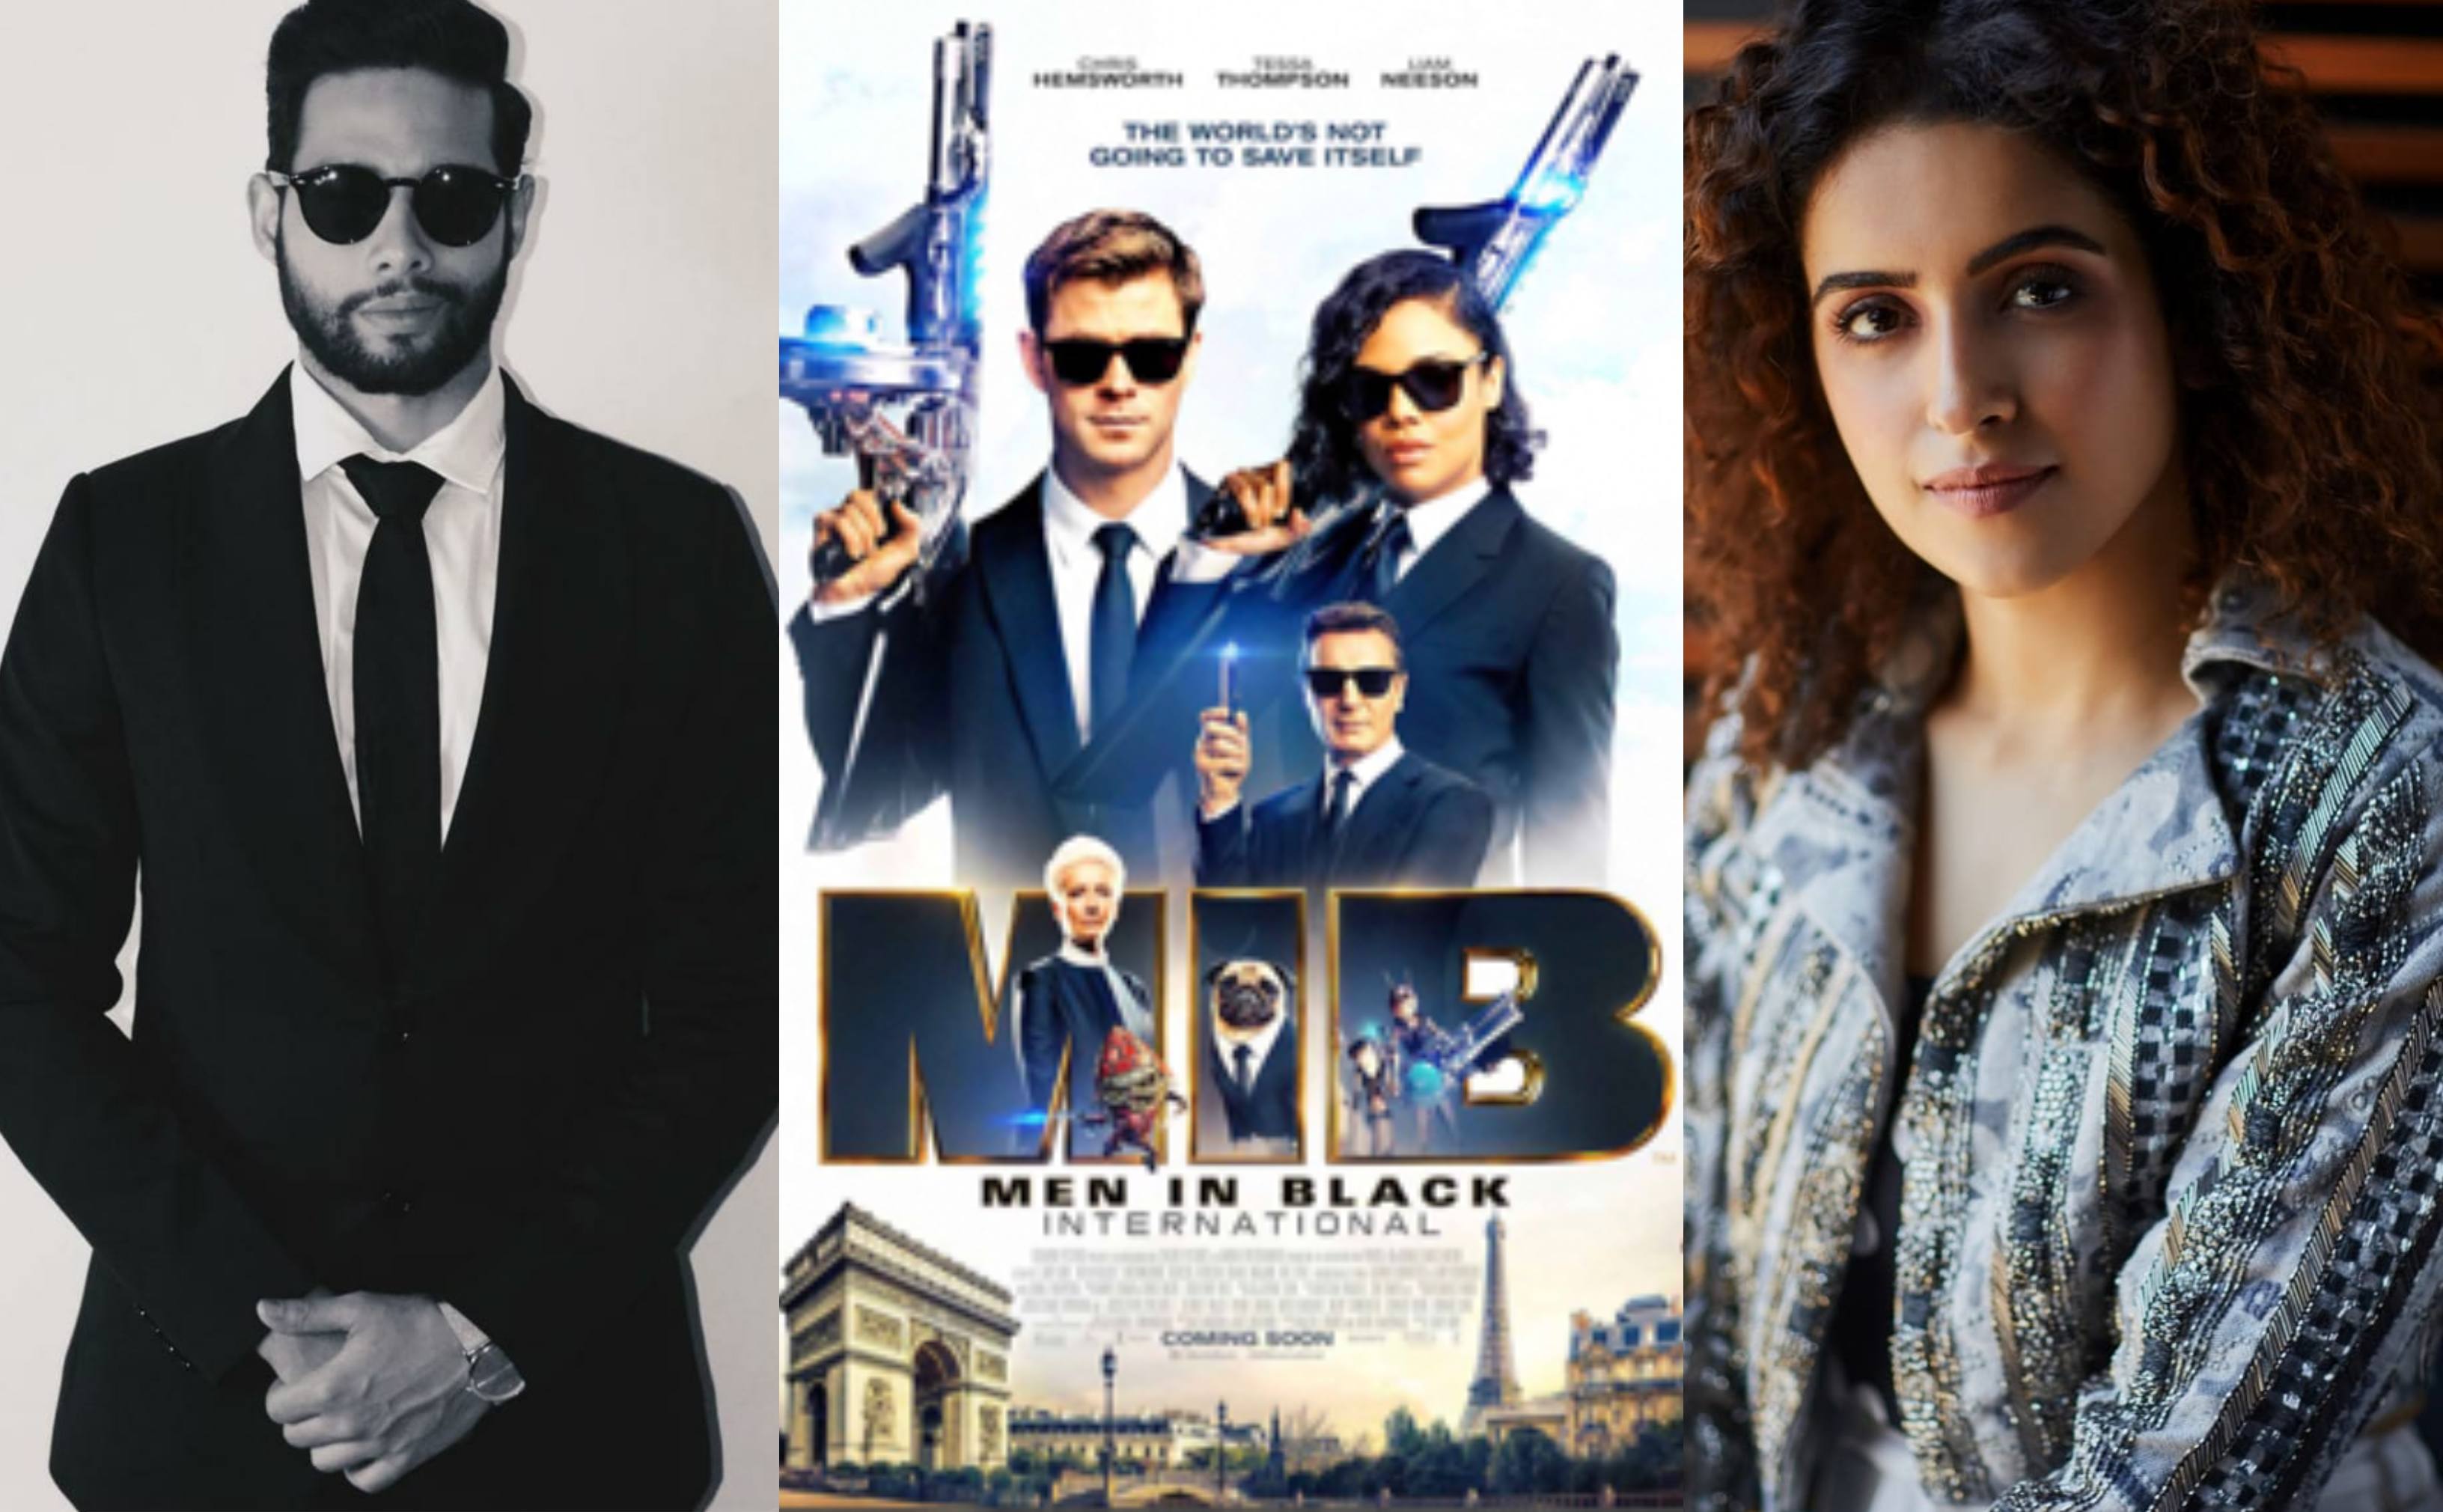 Siddhant Chaturvedi And Sanya Malhotra To Lend Their Voices For Men In Black: International (Hindi)